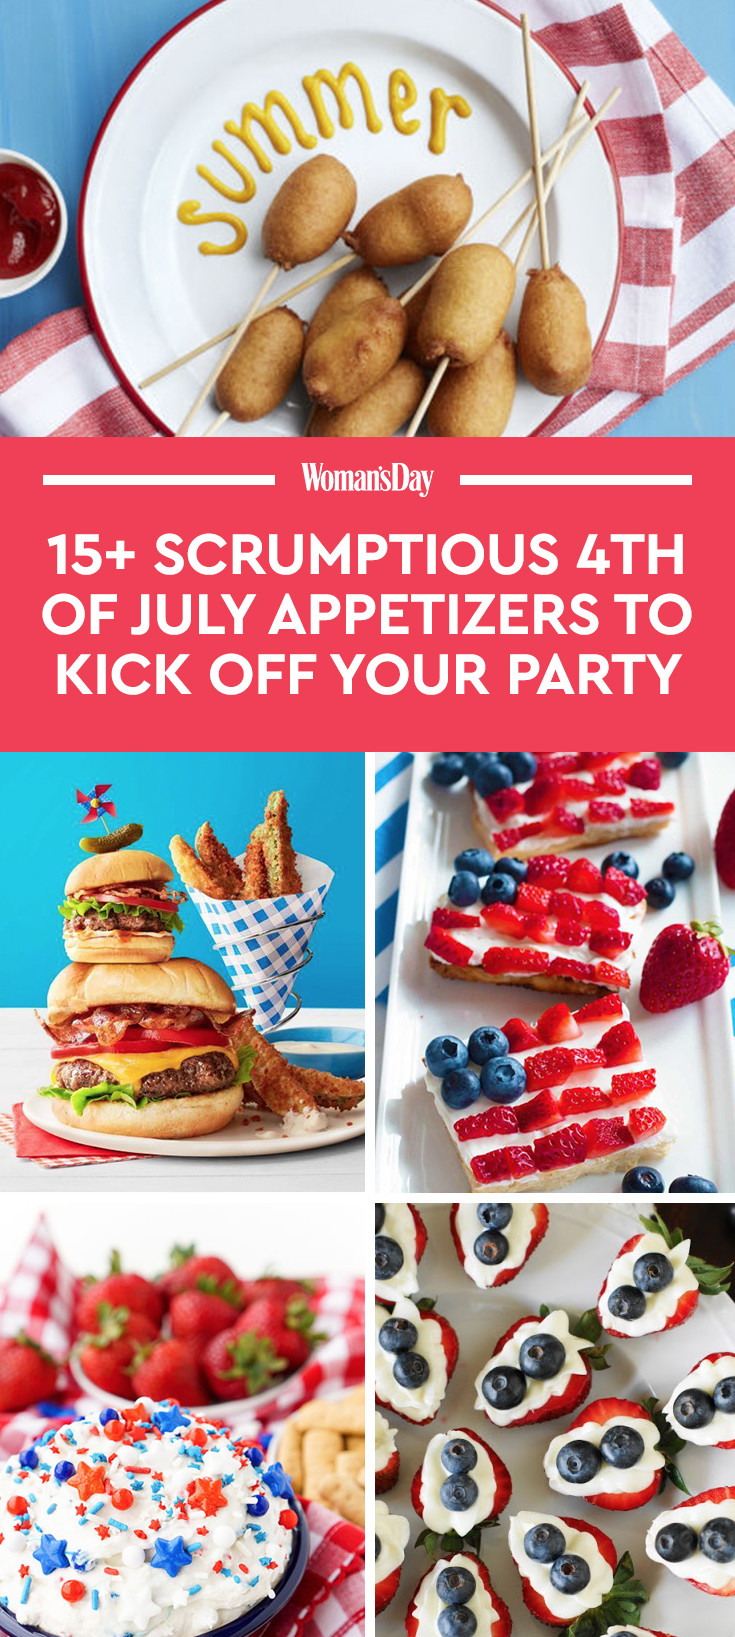 4Th Of July Appetizers
 19 Best 4th of July Appetizers Recipes for Fourth of